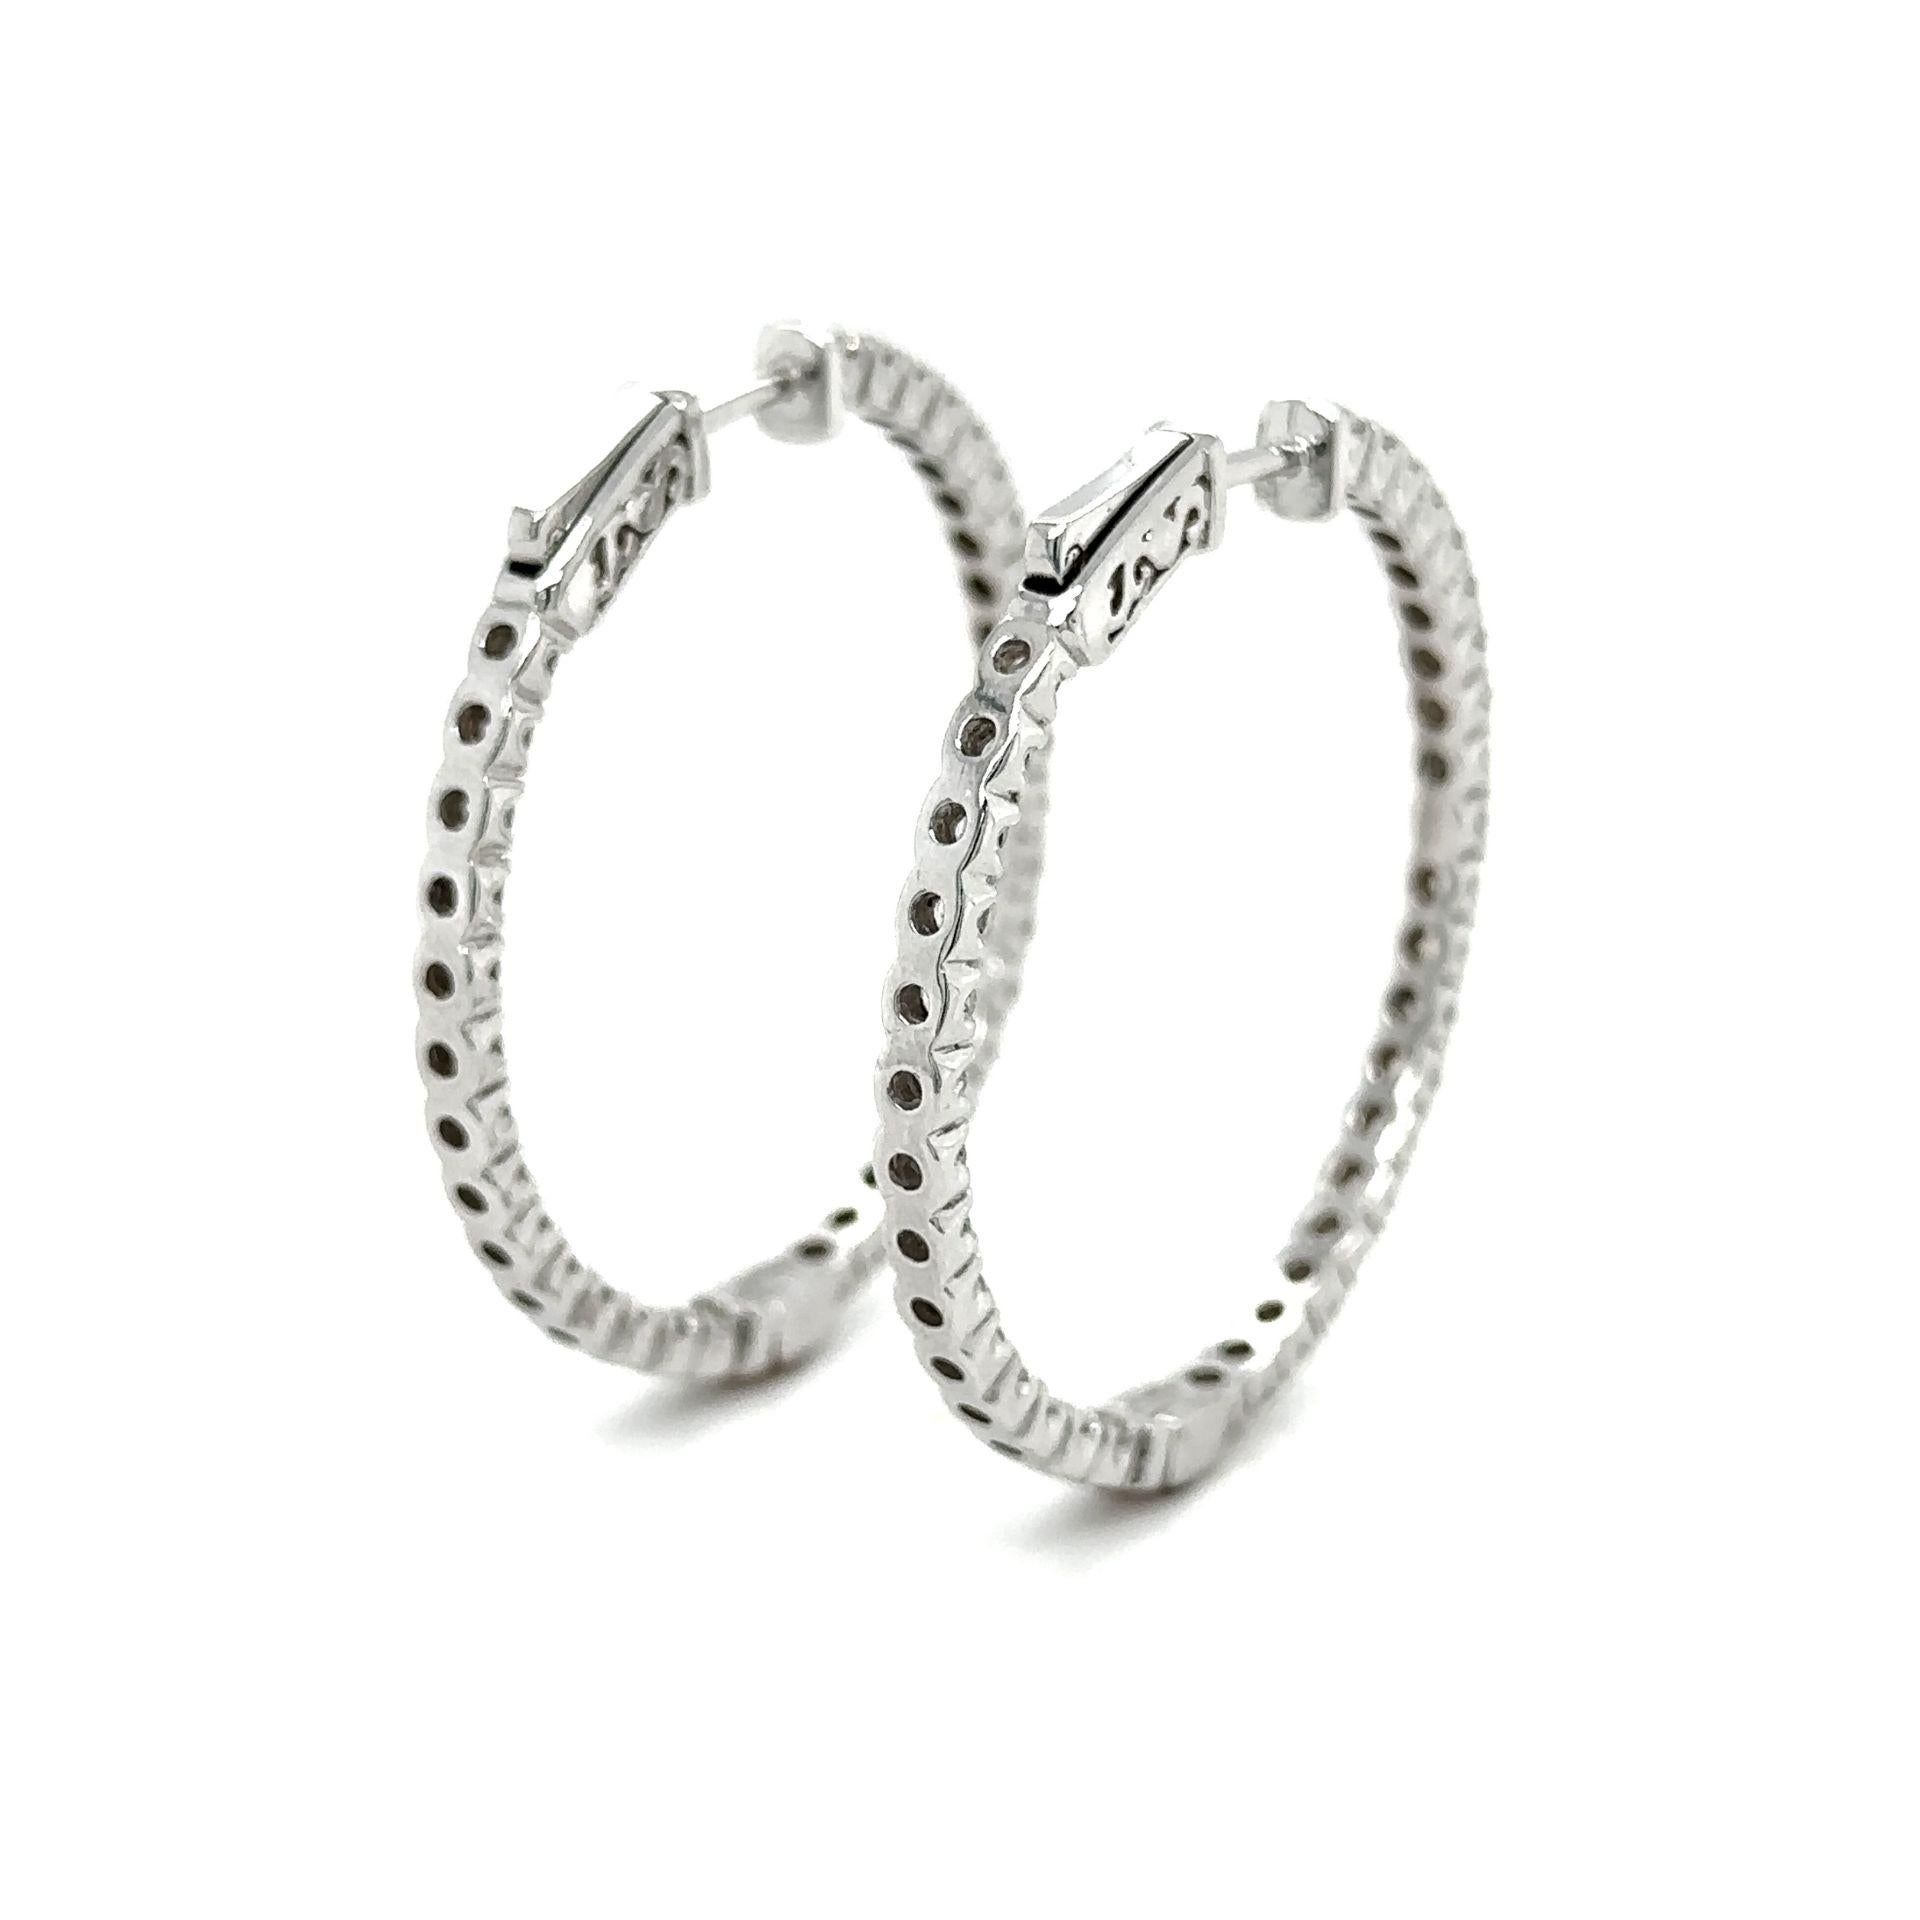 Contemporary Diamond Hoop Earrings 14K White Gold 2.72 carats G I Color SI Clarity For Sale